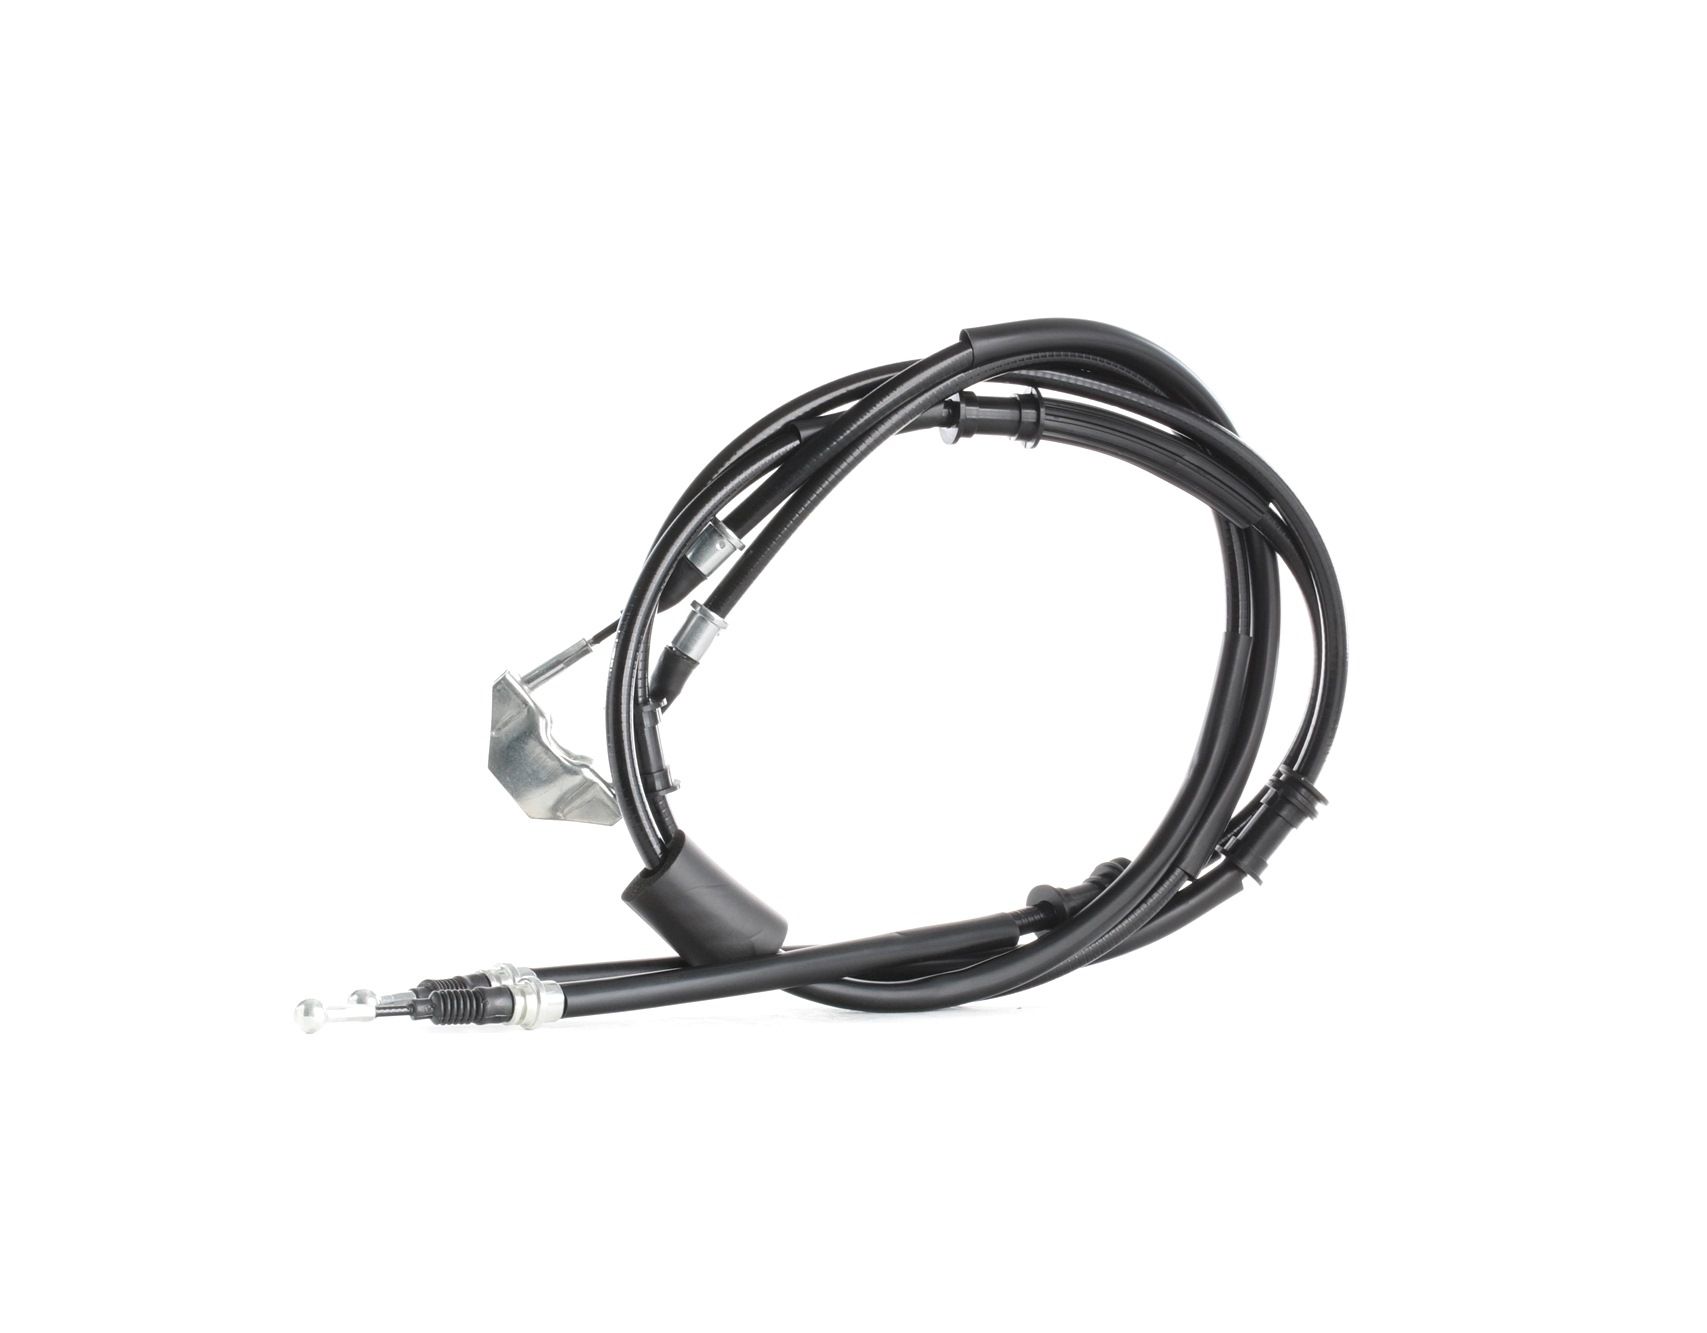 RIDEX 124C0214 Hand brake cable Rear, Left, Right, 2X1615/1440mm, Disc Brake, for parking brake